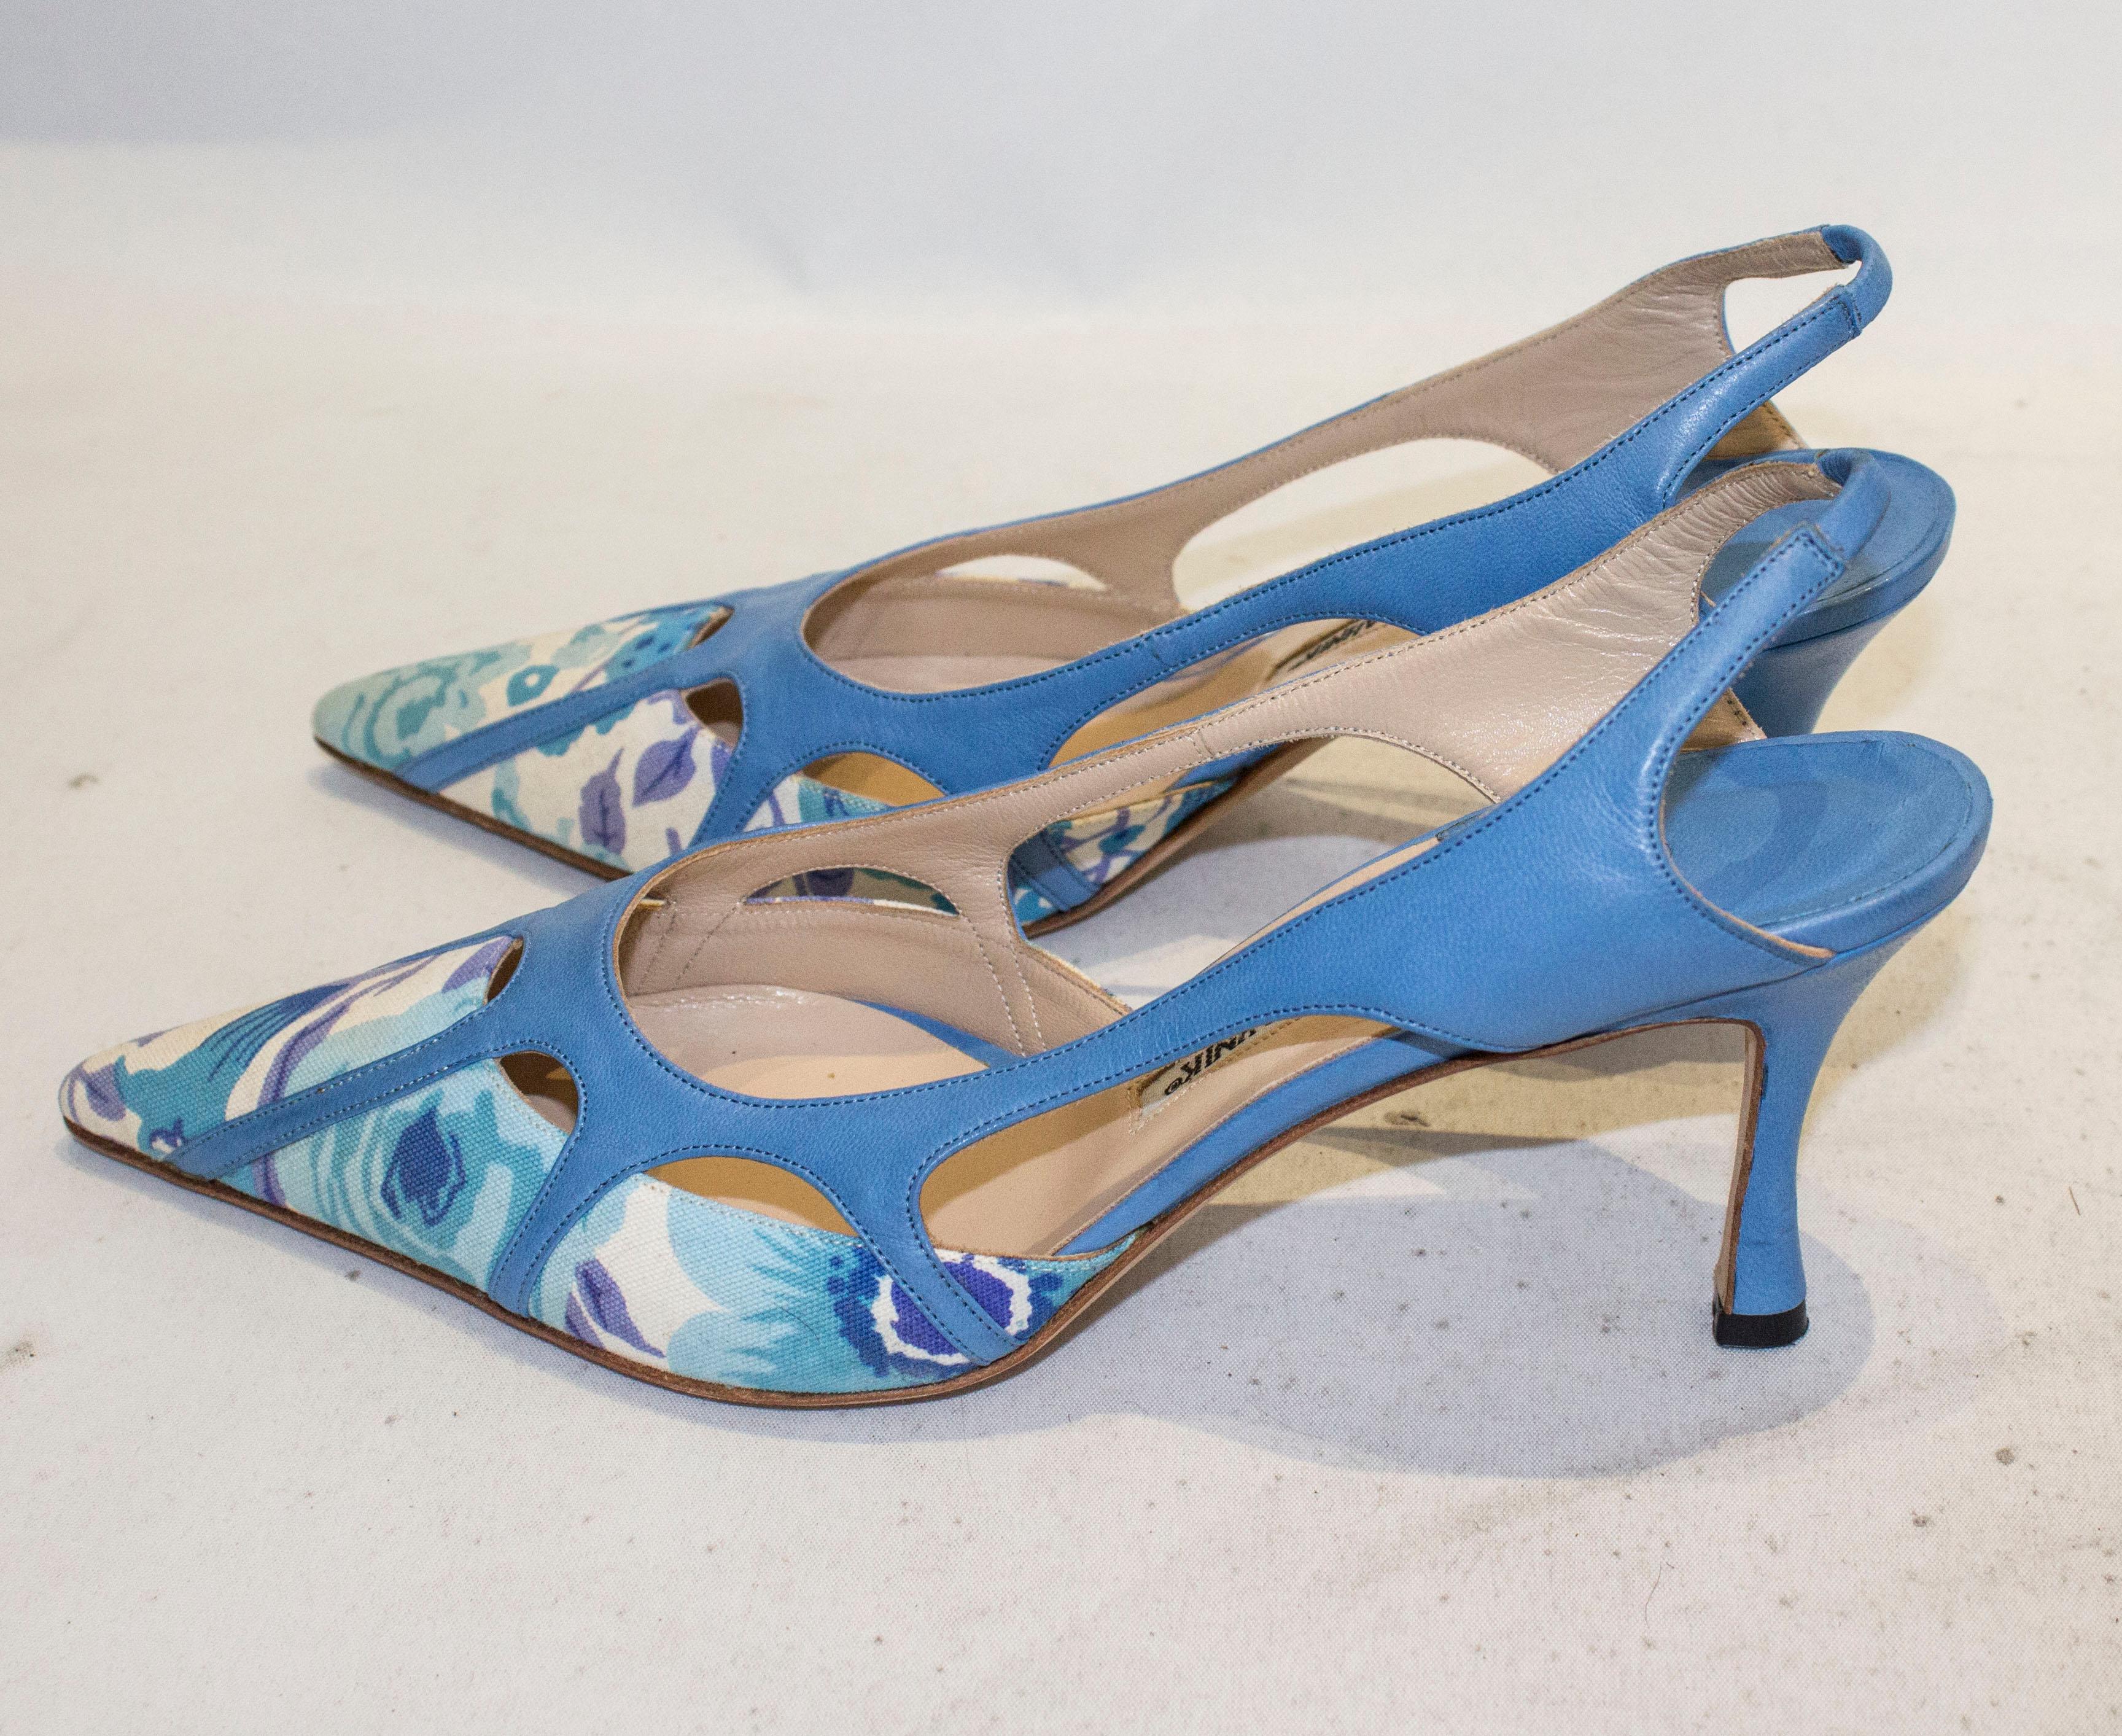 Gray Manolo Blahnik Blue Leather and Fabric Sling Back Shoes